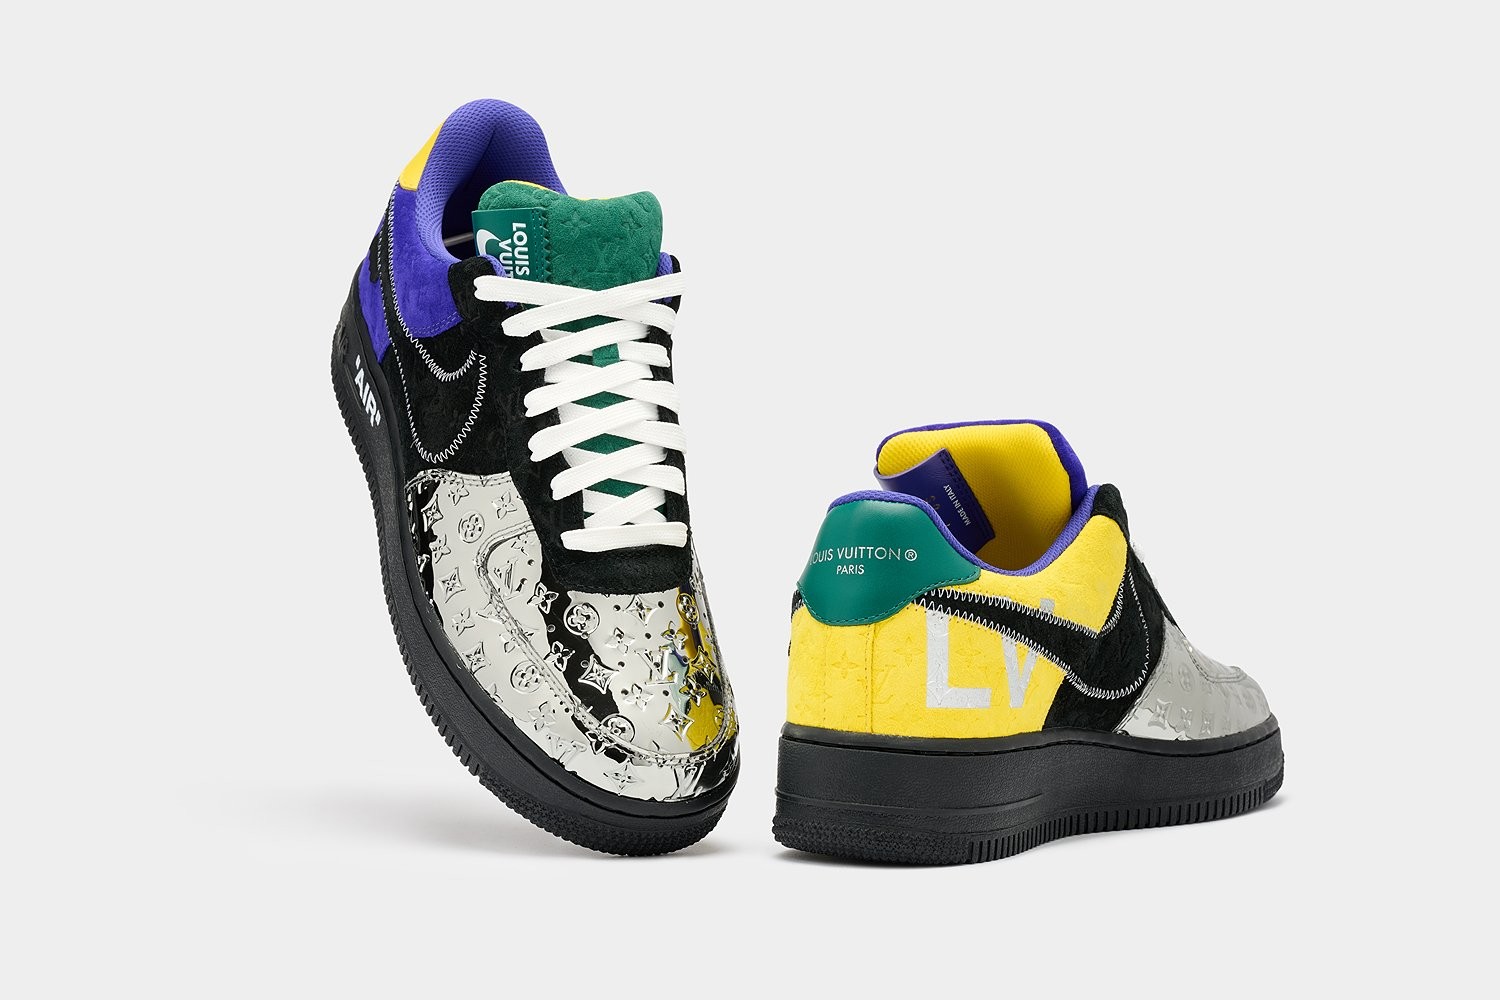 A complete series of nine Louis Vuitton and Nike “Air Force 1” by Virgil Abloh - Image 29 of 50